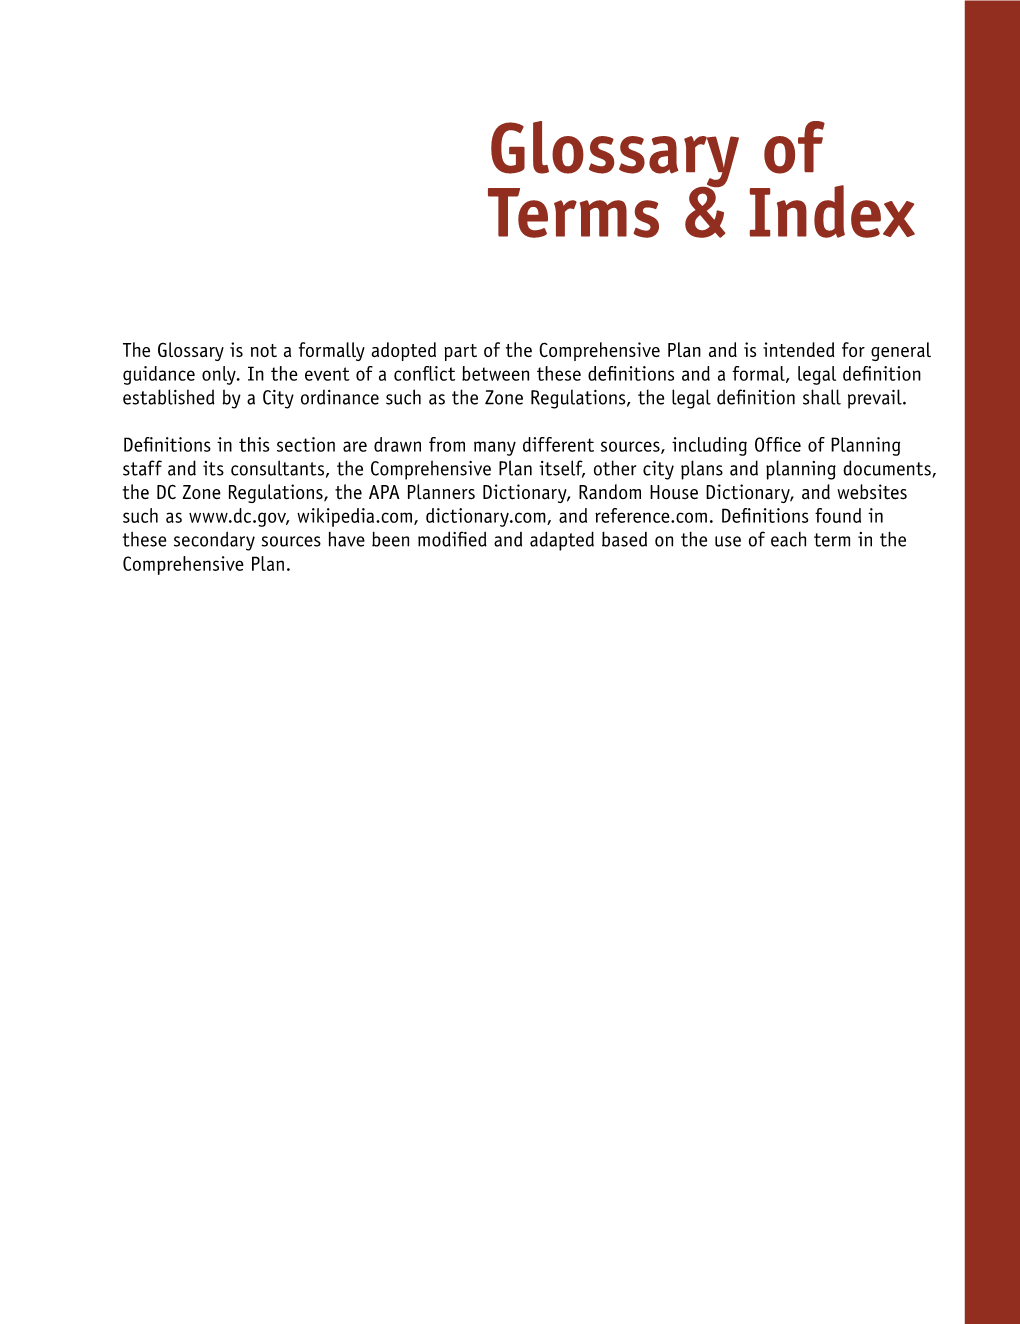 Glossary and Index